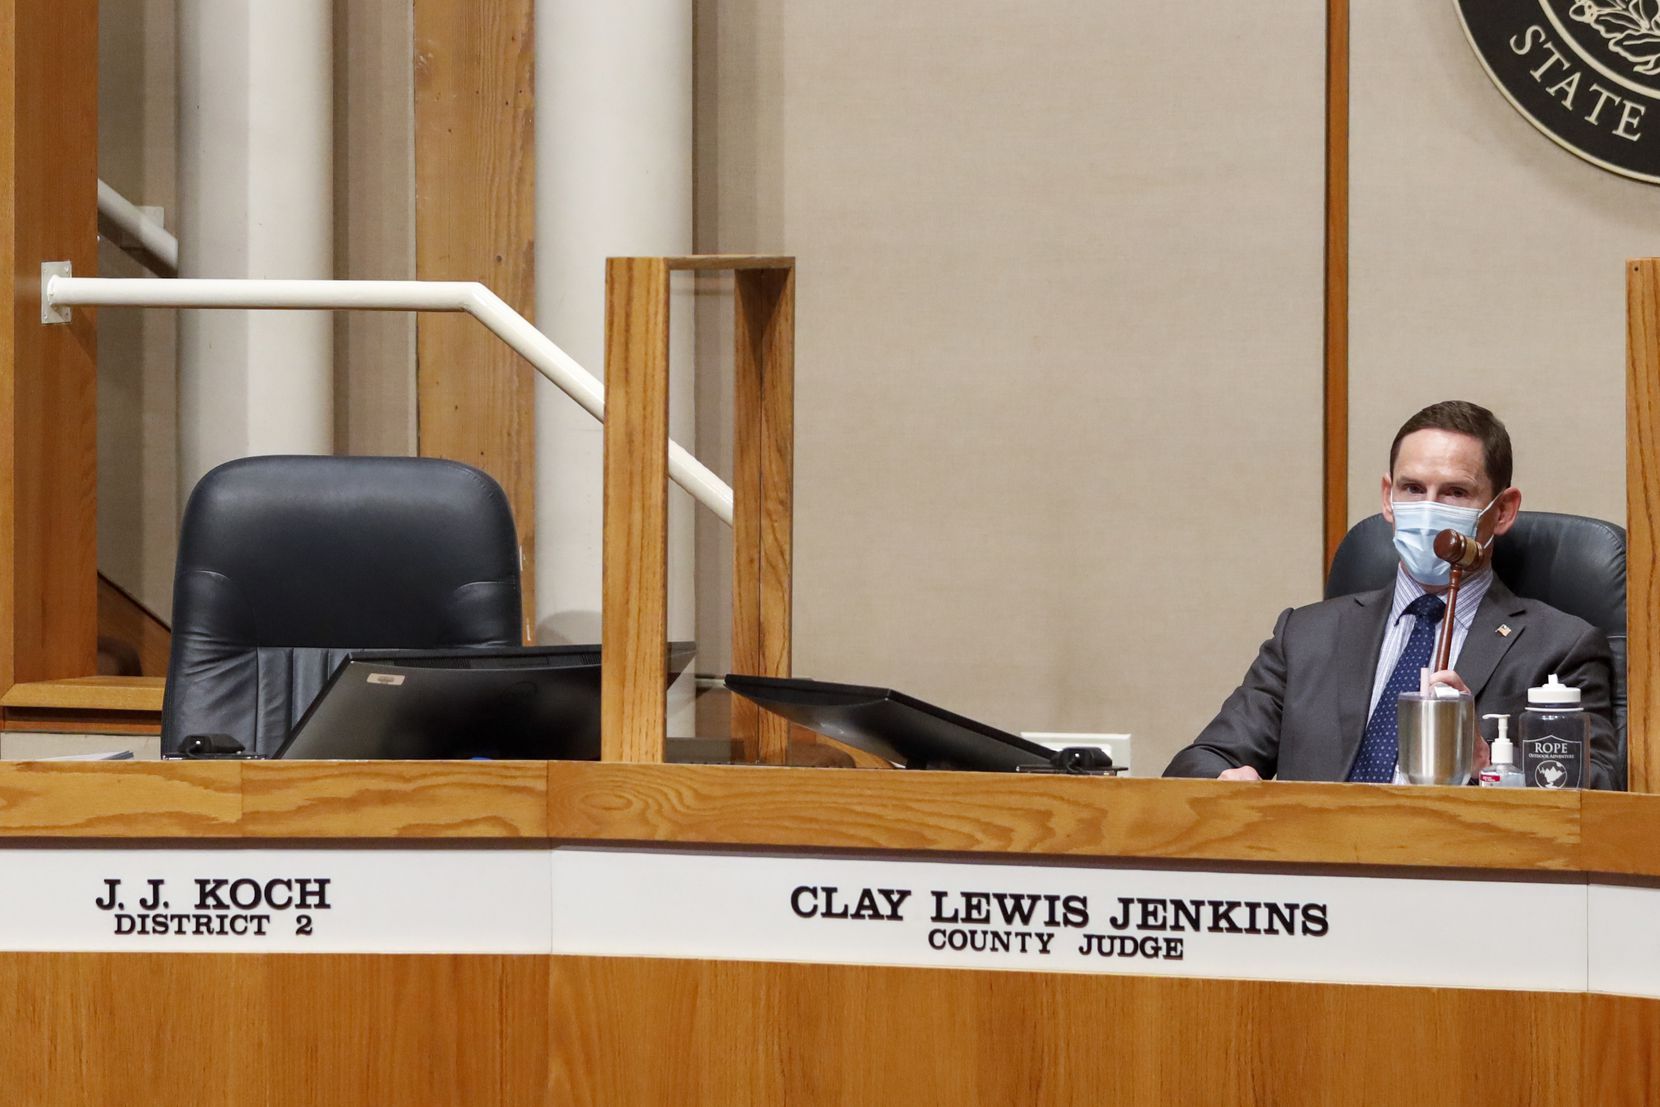 Dallas County Judge Clay Jenkins banged a gavel next to the empty seat of Dallas County Commissioner J.J. Koch during a commissioners court meeting Tuesday. Earlier, Koch was escorted from the meeting for refusing to wear a mask. (Elias Valverde II/The Dallas Morning News)